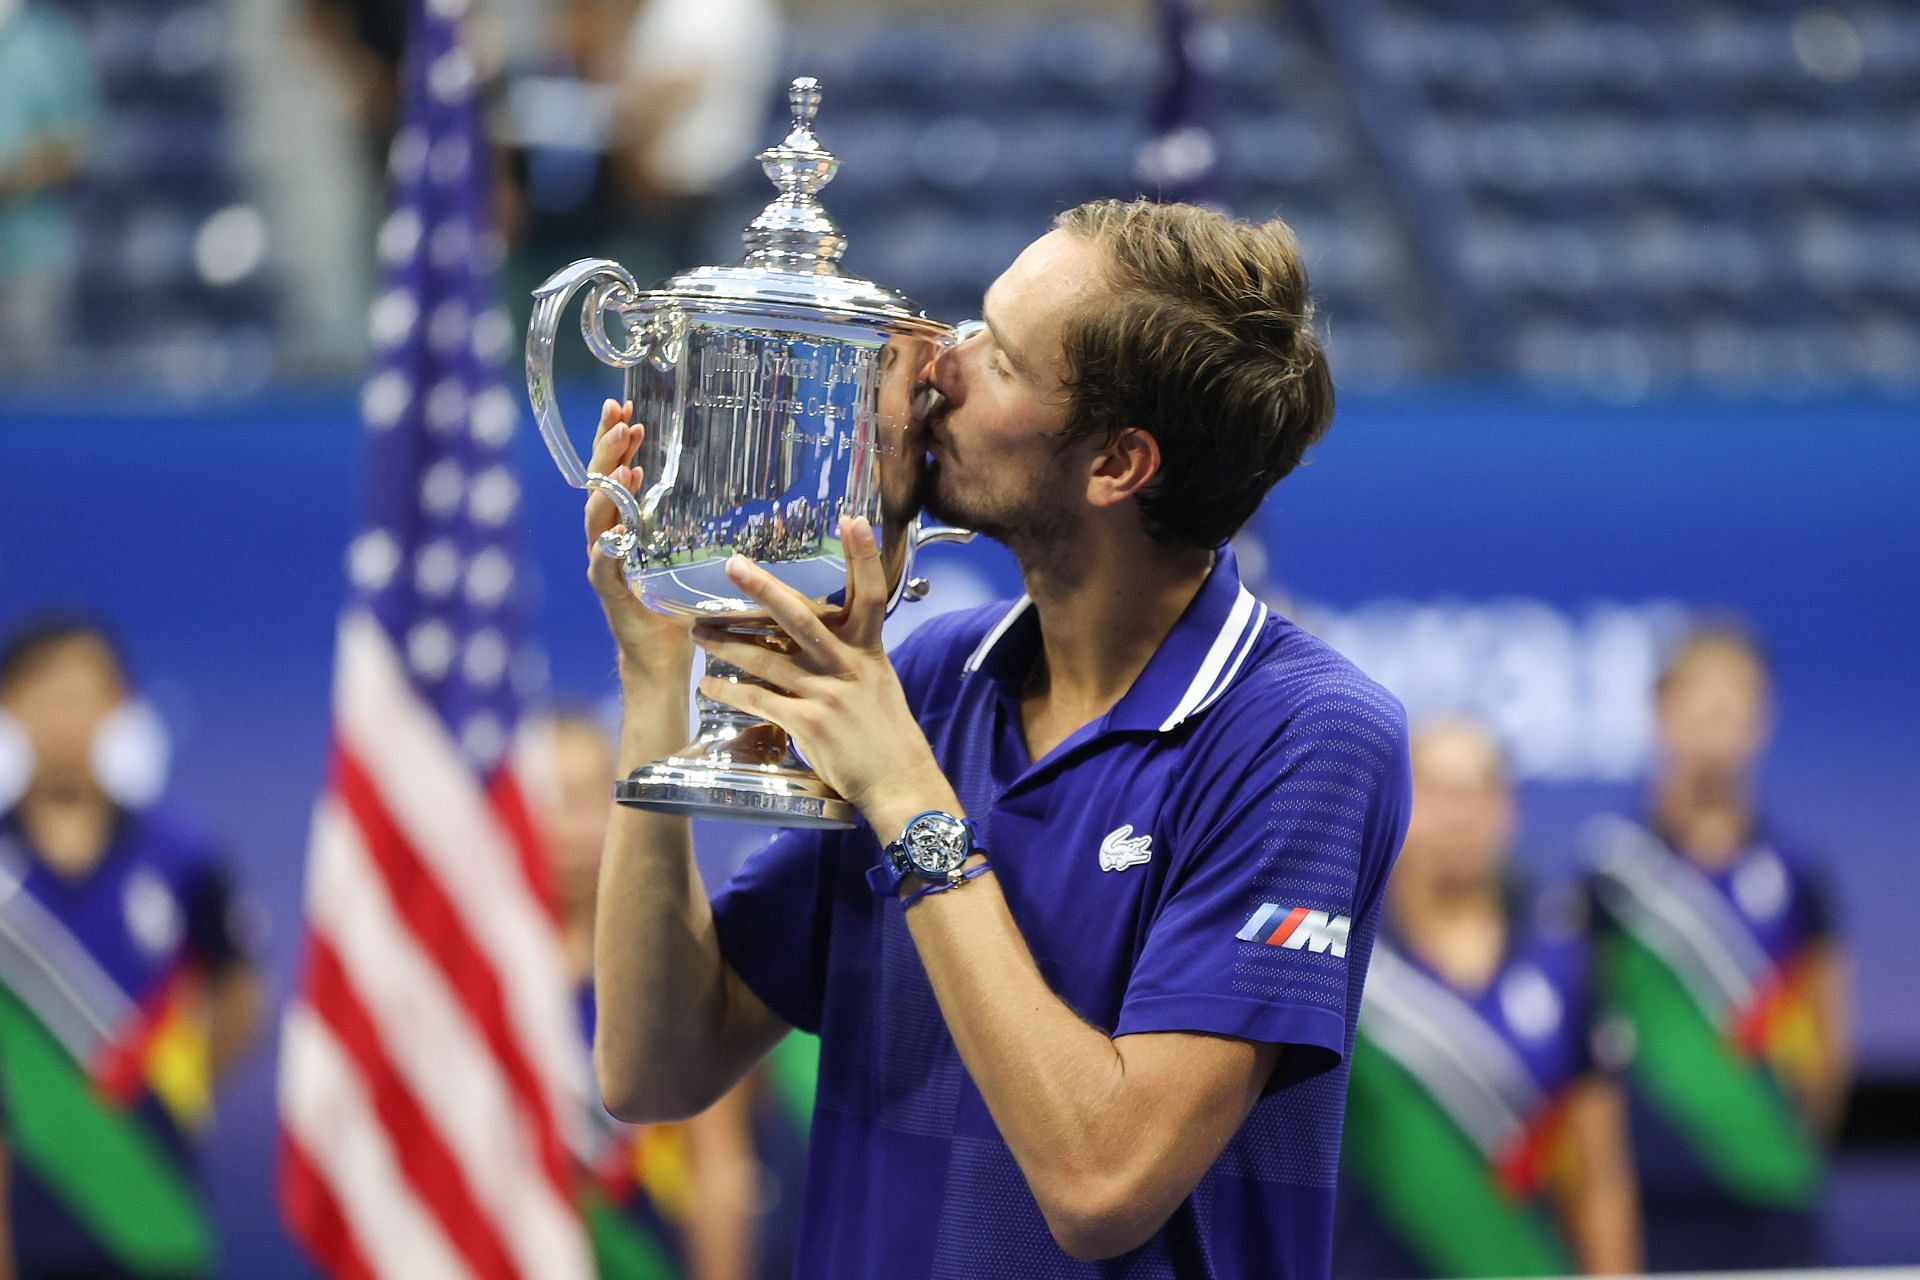 Medvedev won his first ever Slam in 2021, beating Novak Djokovic in the US Open final